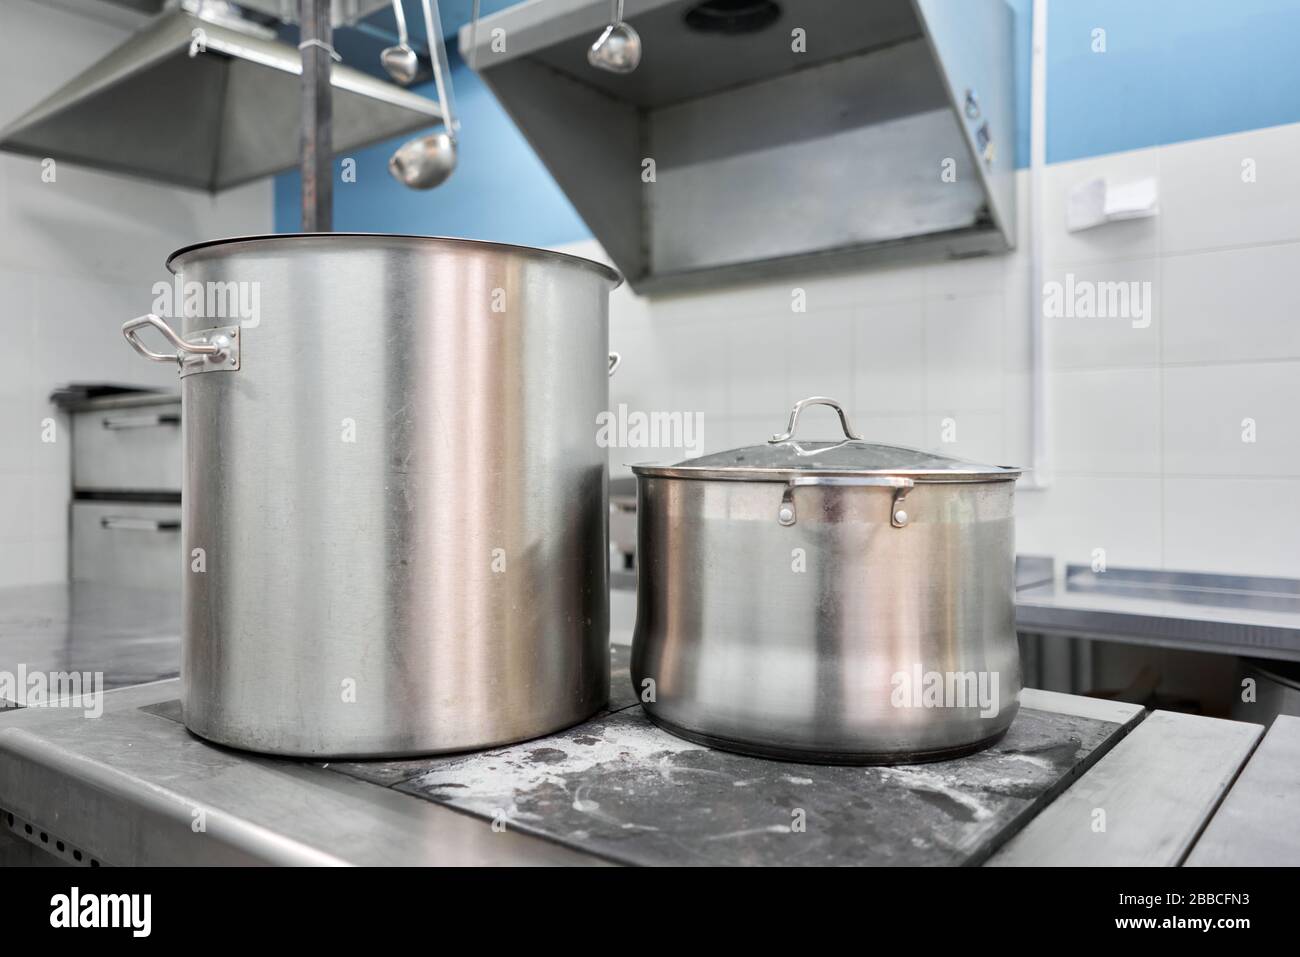 https://c8.alamy.com/comp/2BBCFN3/closeup-of-large-pots-on-the-stove-chef-cooking-at-commercial-kitchen-hot-job-real-dirty-restaurant-kitchen-2BBCFN3.jpg